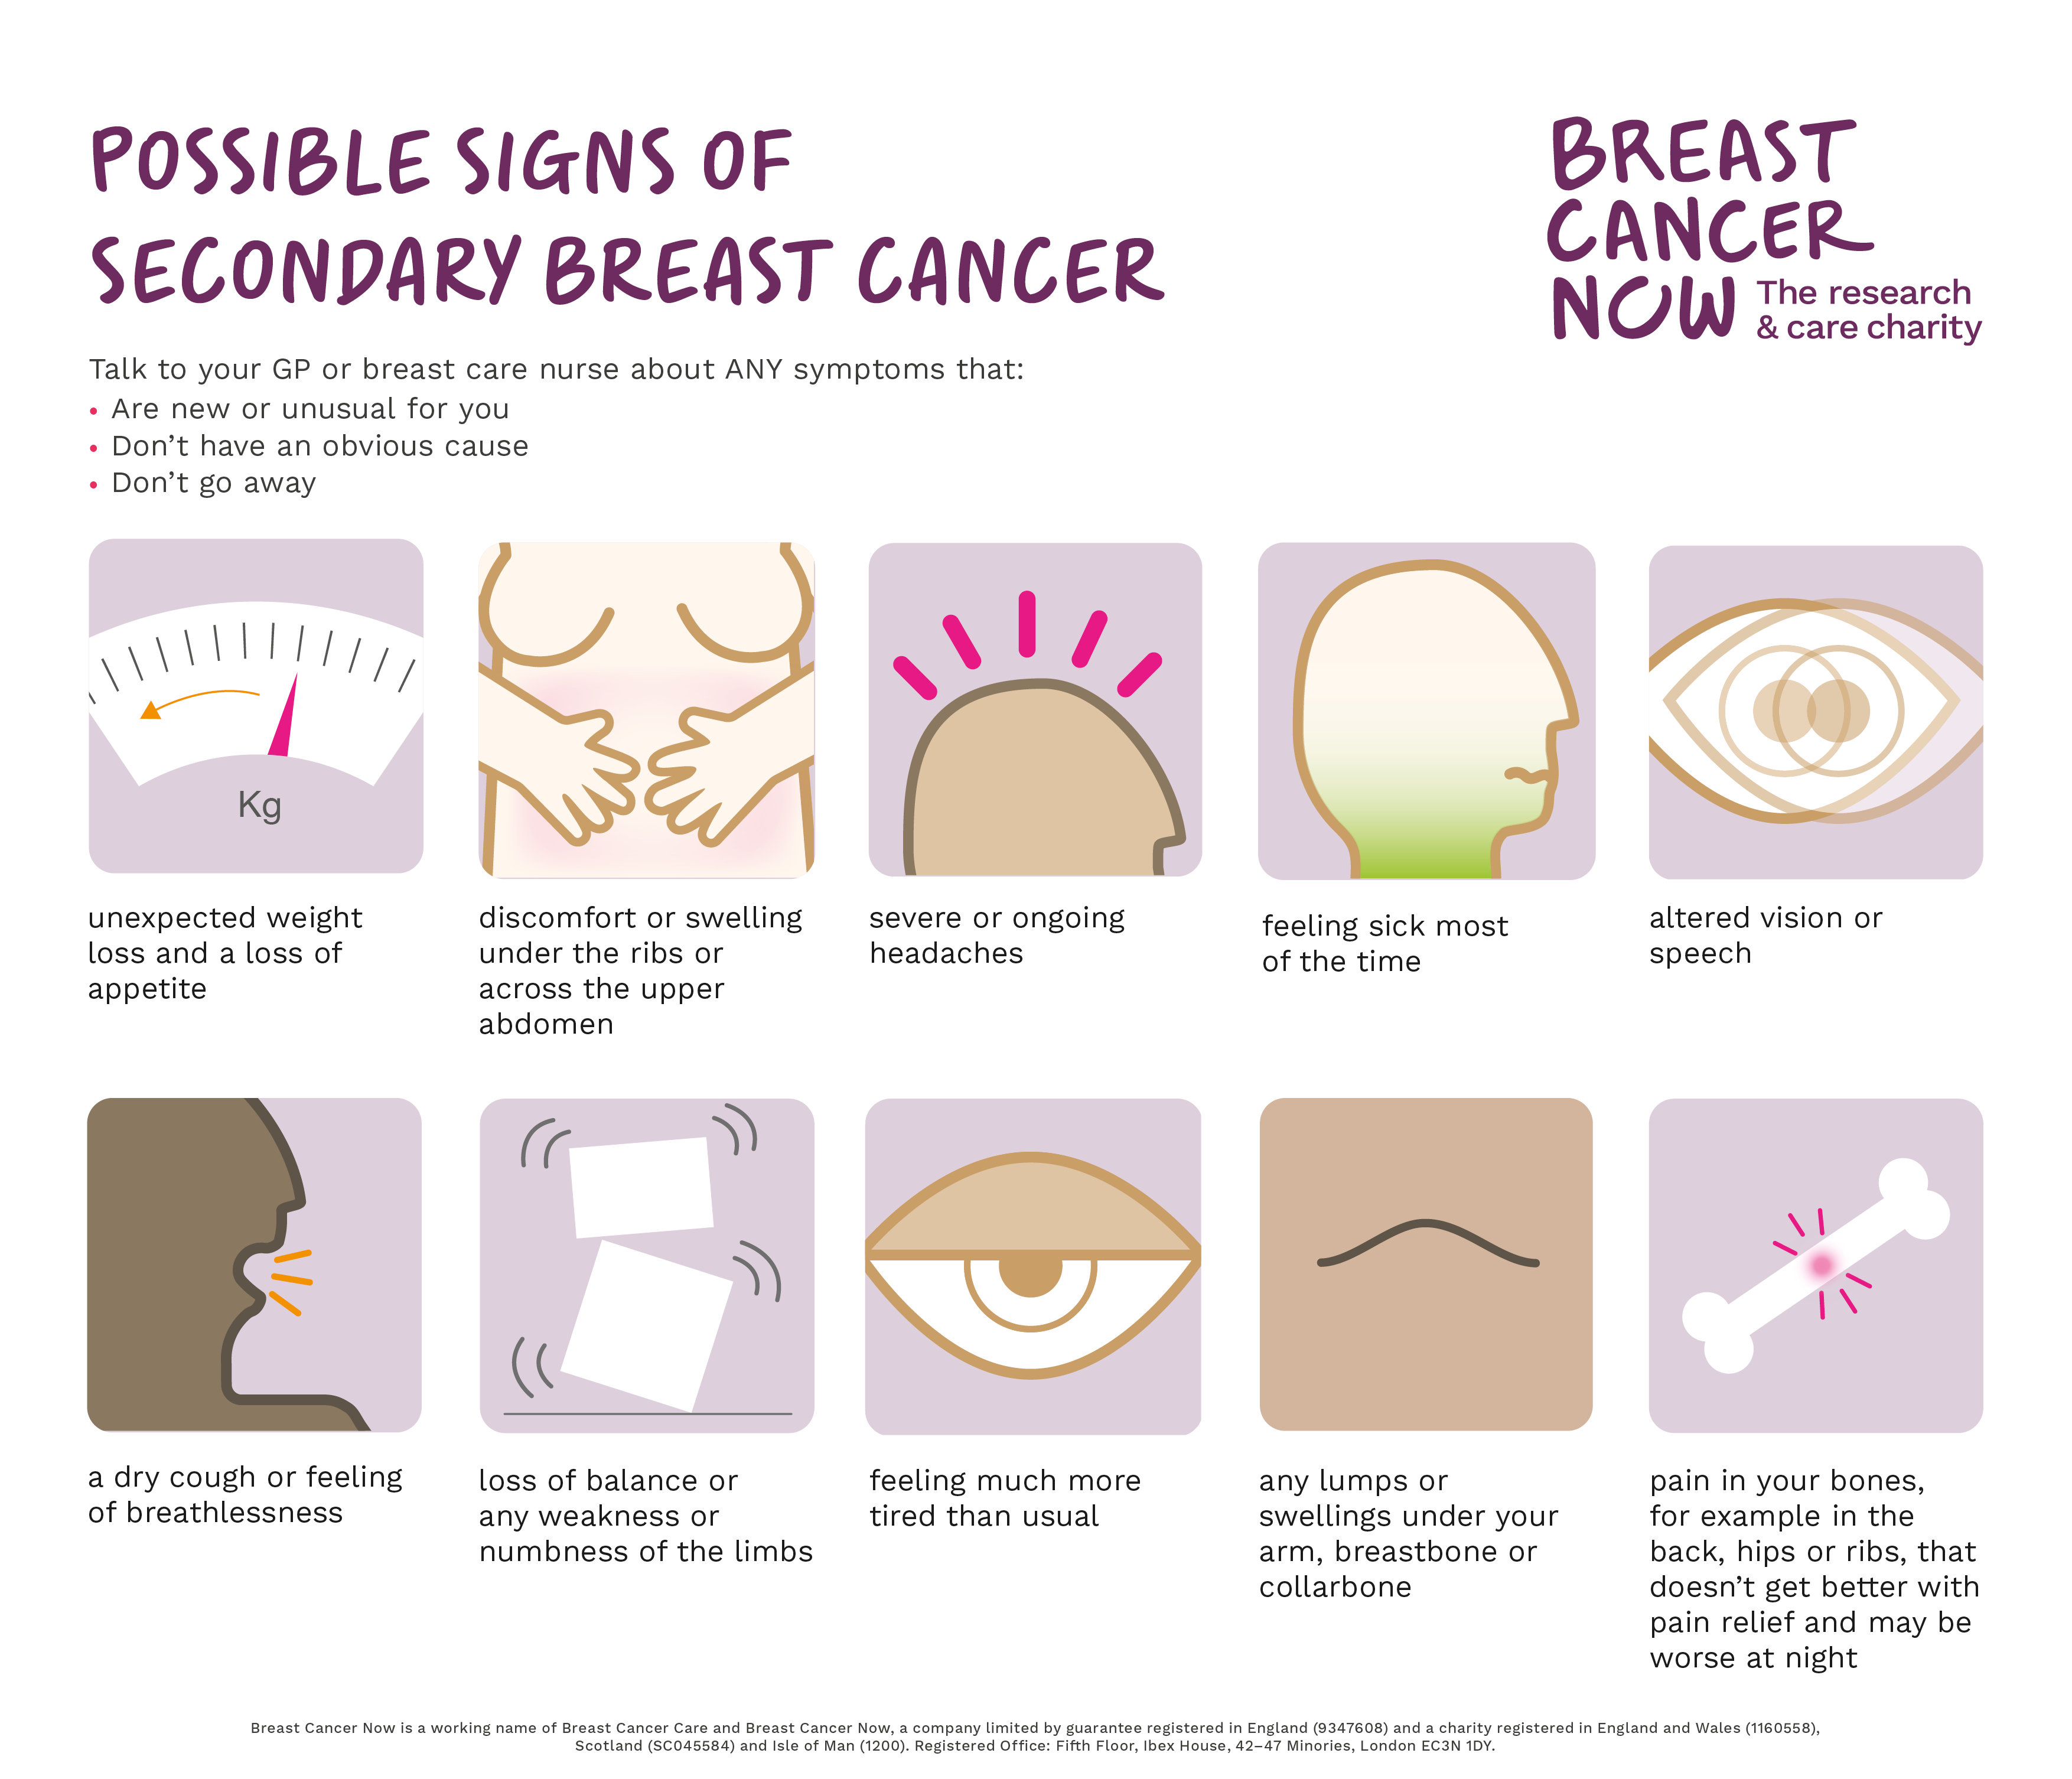 Secondary breast cancer explained